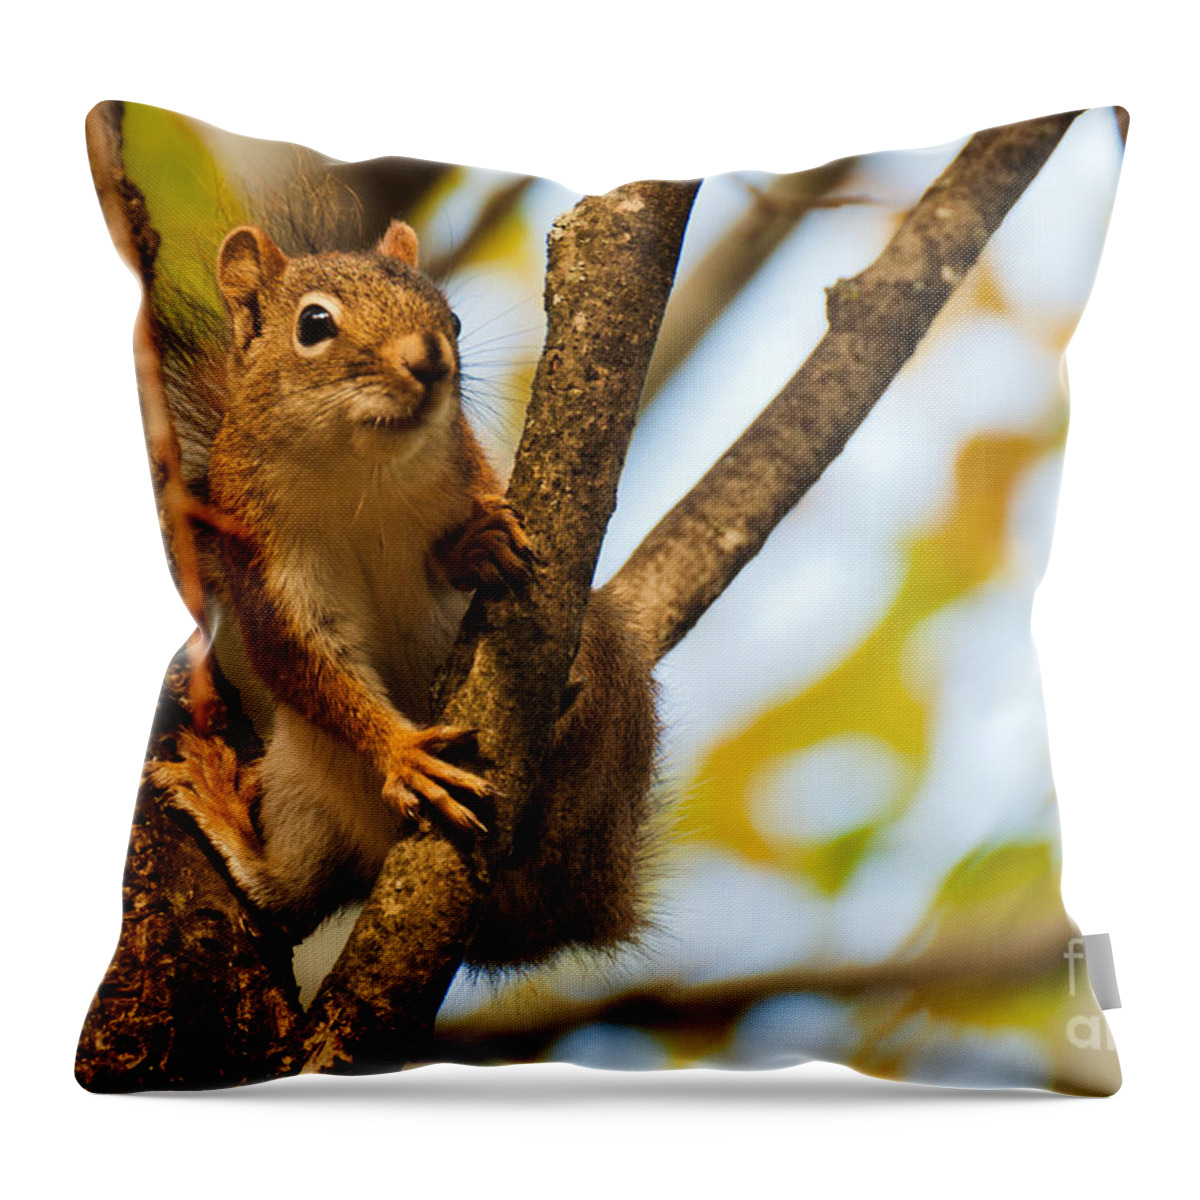 Squirrel Throw Pillow featuring the photograph Squirrel on High by Cheryl Baxter